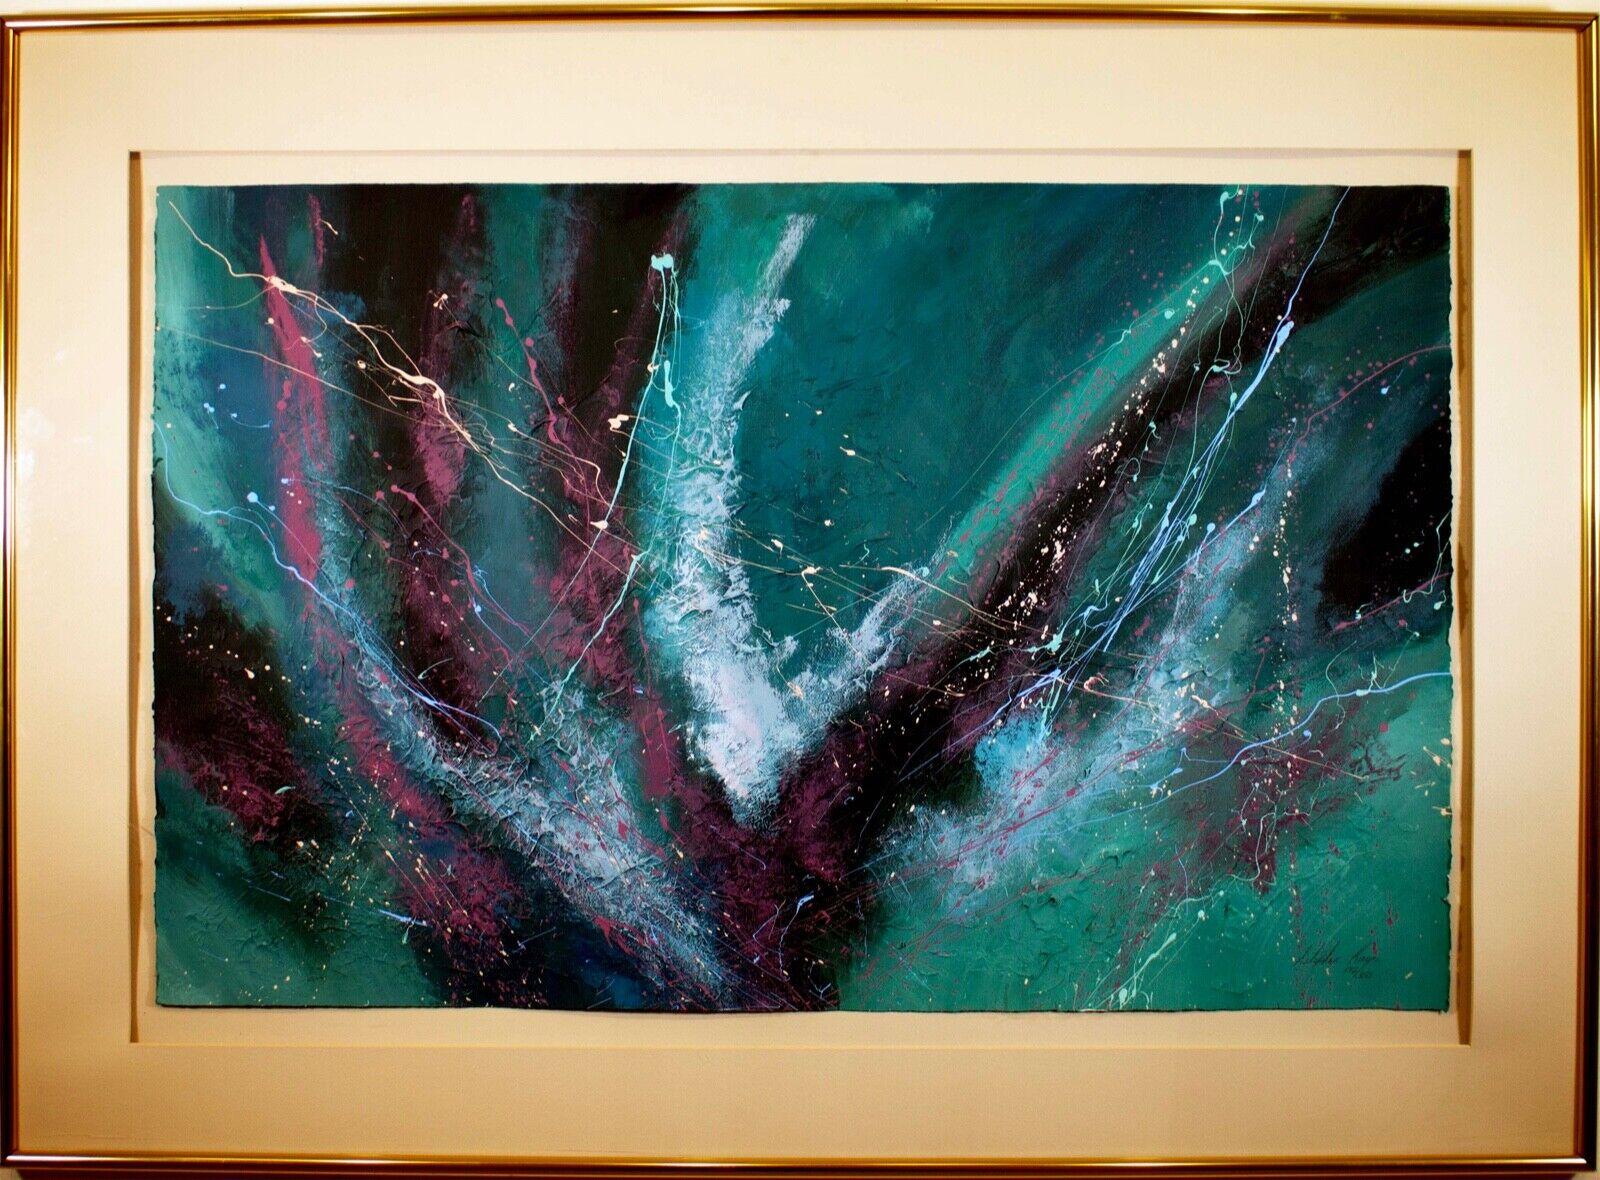 An energetic abstract expressionism contemporary silkscreen on paper by Stephen Kaye. Hand signed in pencil on the bottom right with an annotation of 172/350. A lovely combination of jewel tones – teal, turquoise, magenta, and royal purple – in a